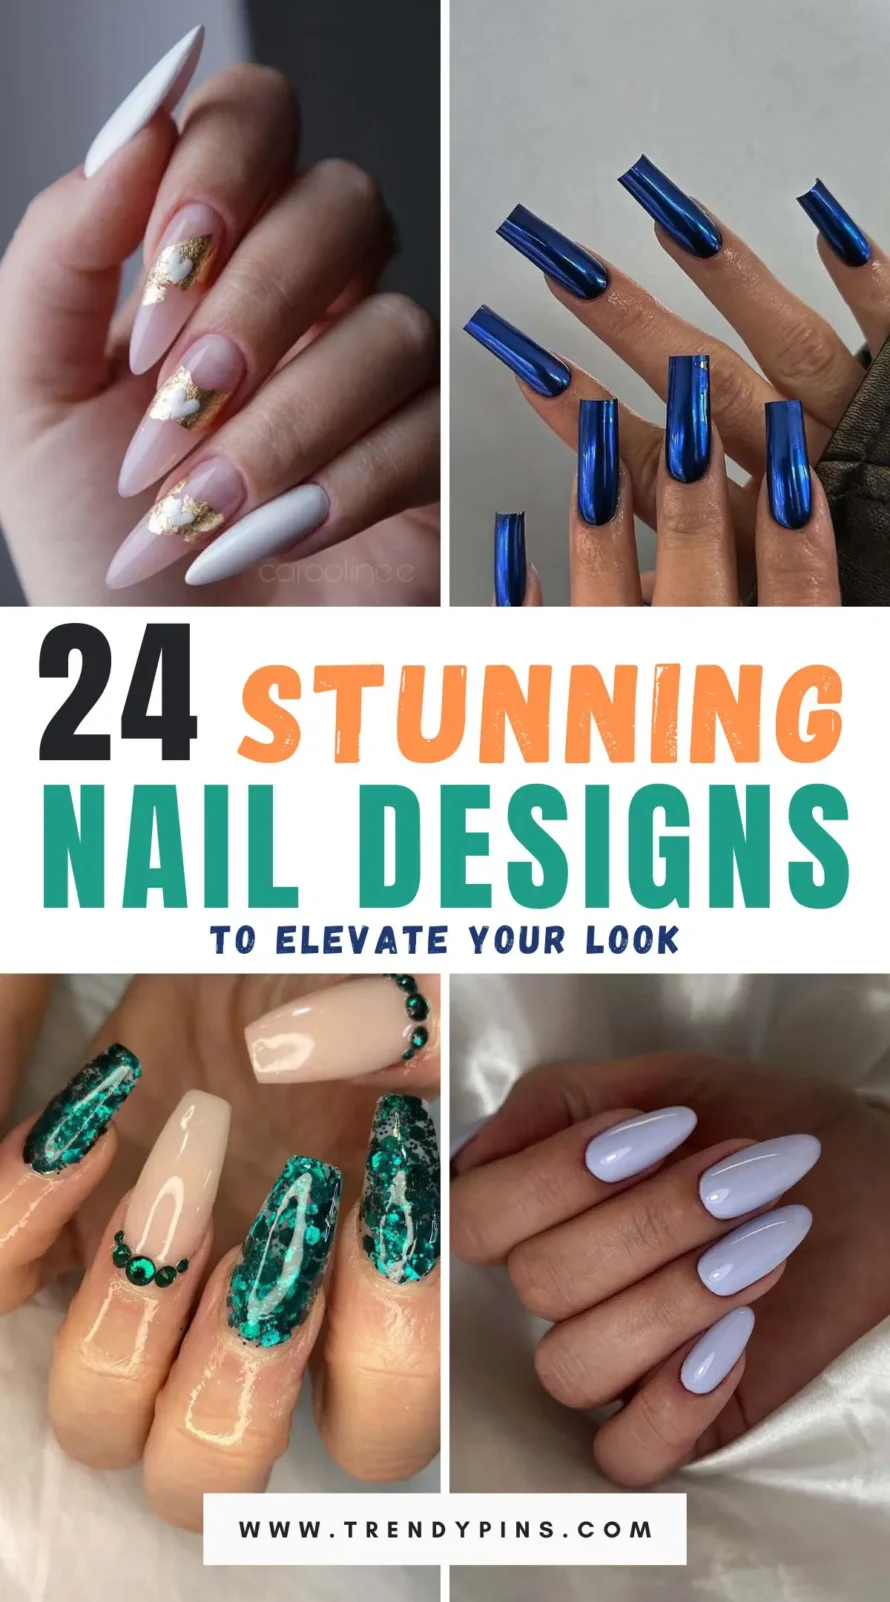 Explore 24 incredible nail designs to find and flaunt your unique style with the latest trends in nail art.